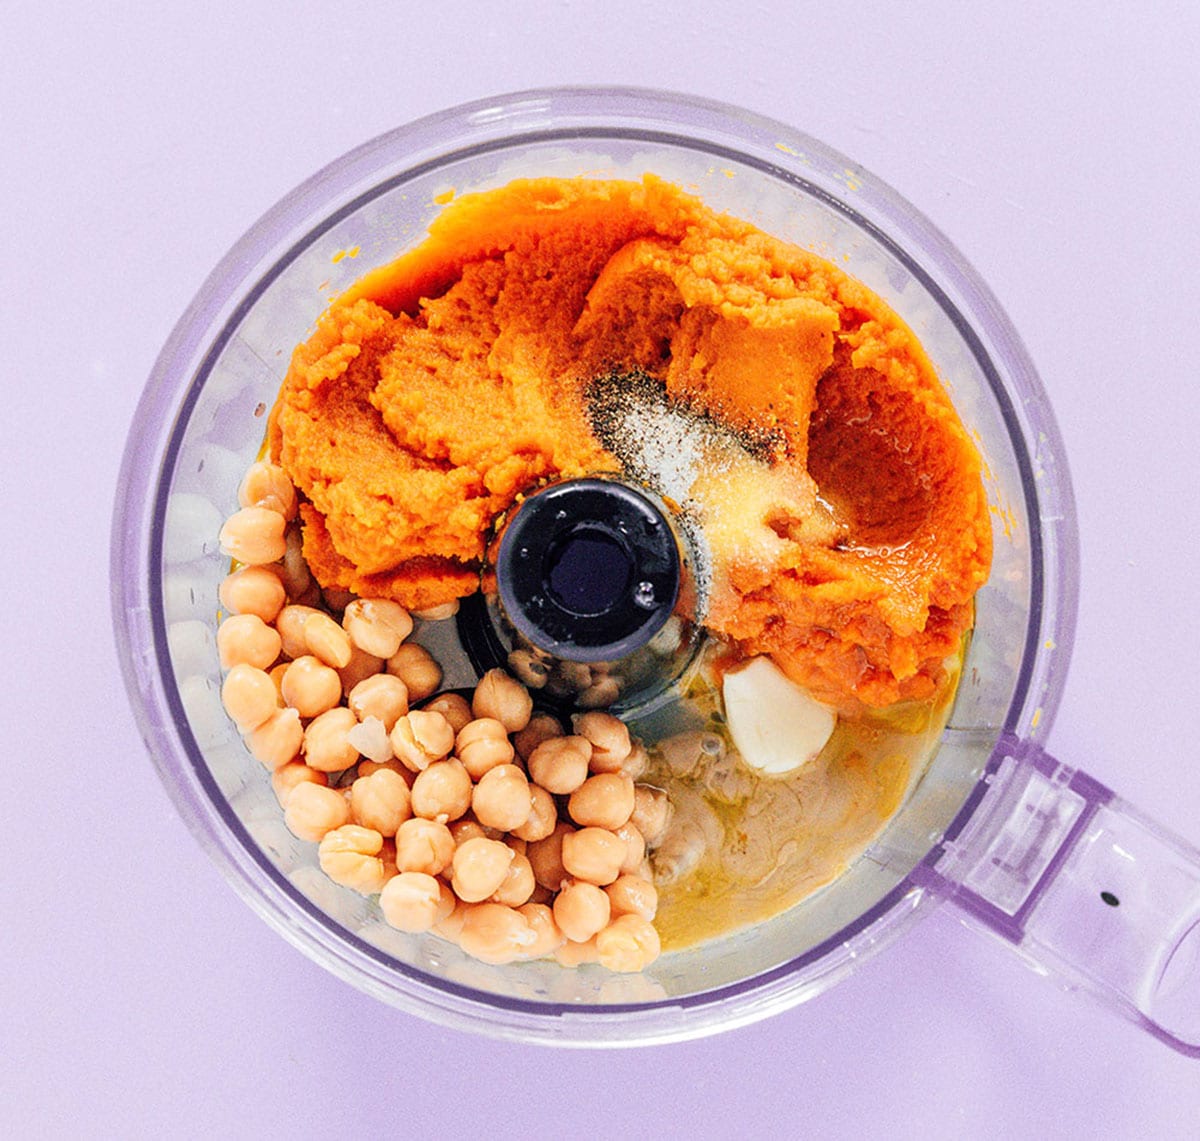 Pumpkin puree, chickpeas, and other ingredients in a food processor to make hummus.